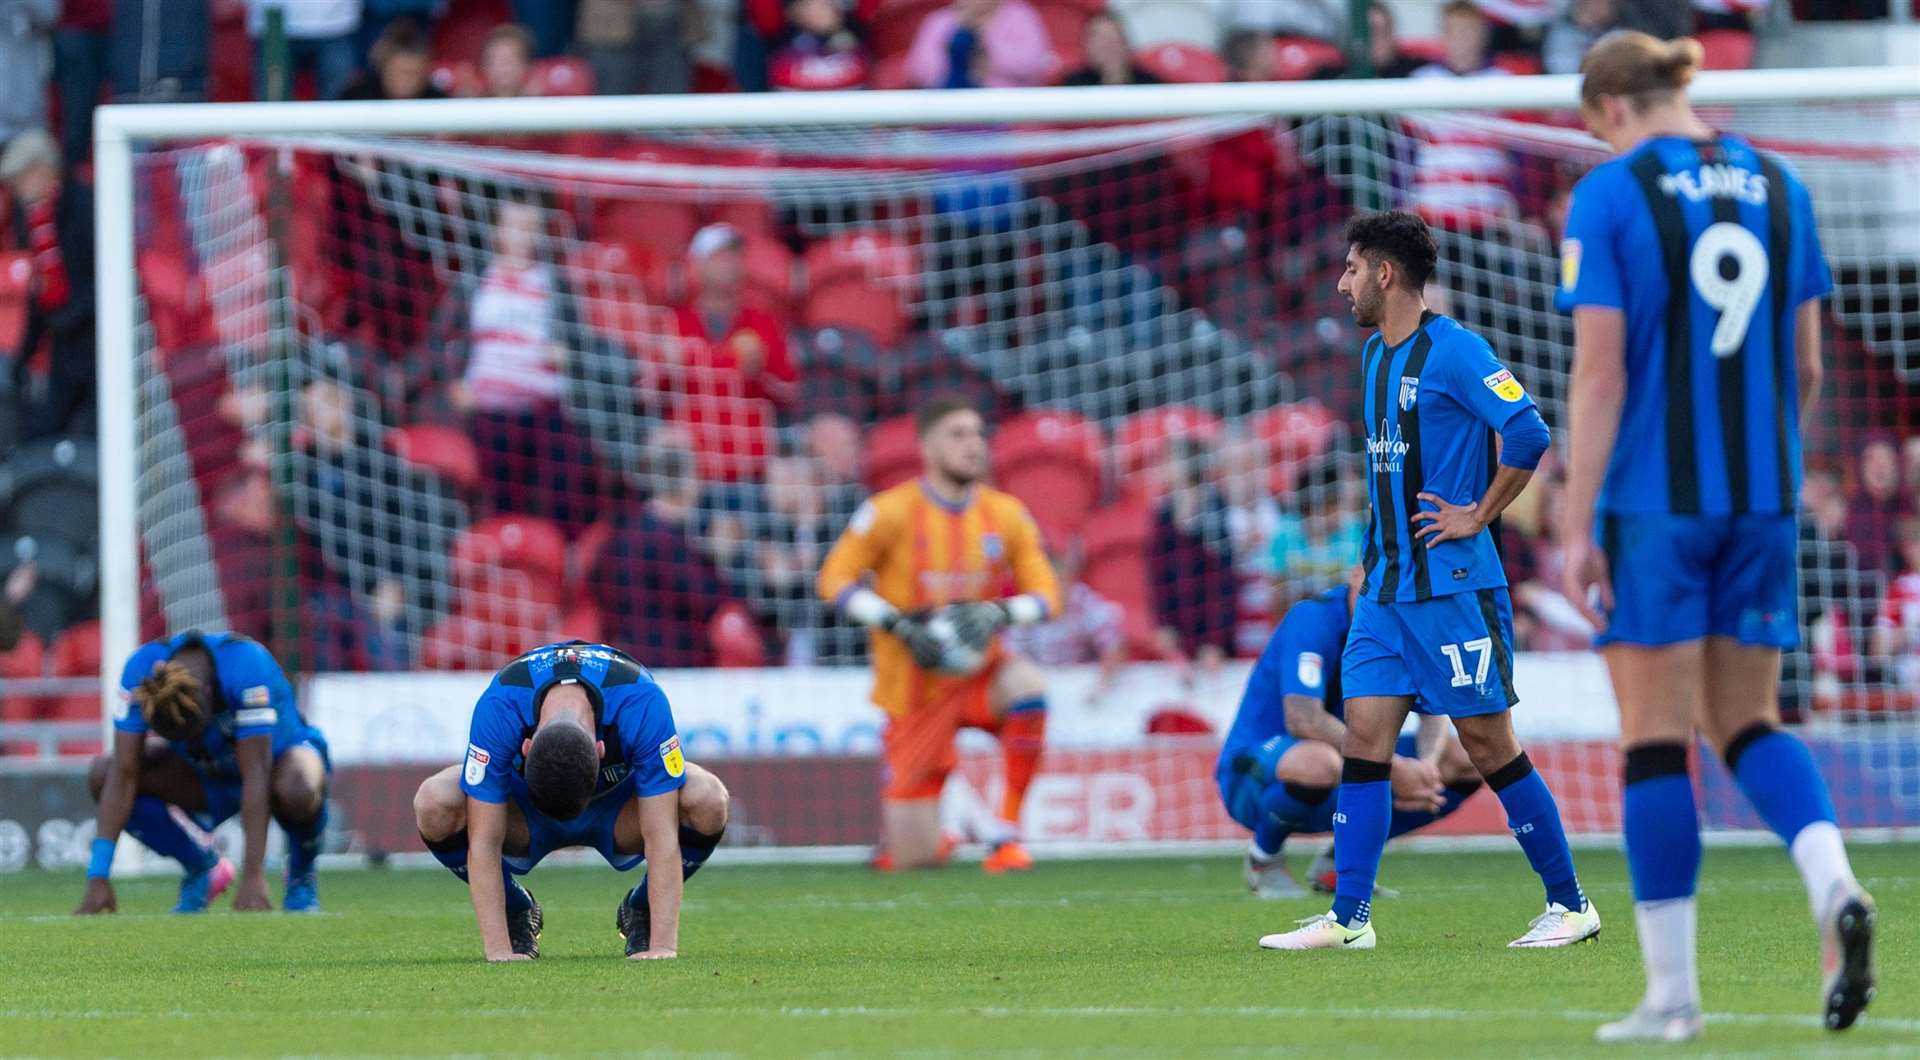 Gills players are left deflated after conceding an injury-time equaliser at Doncaster. Picture: Ady Kerry